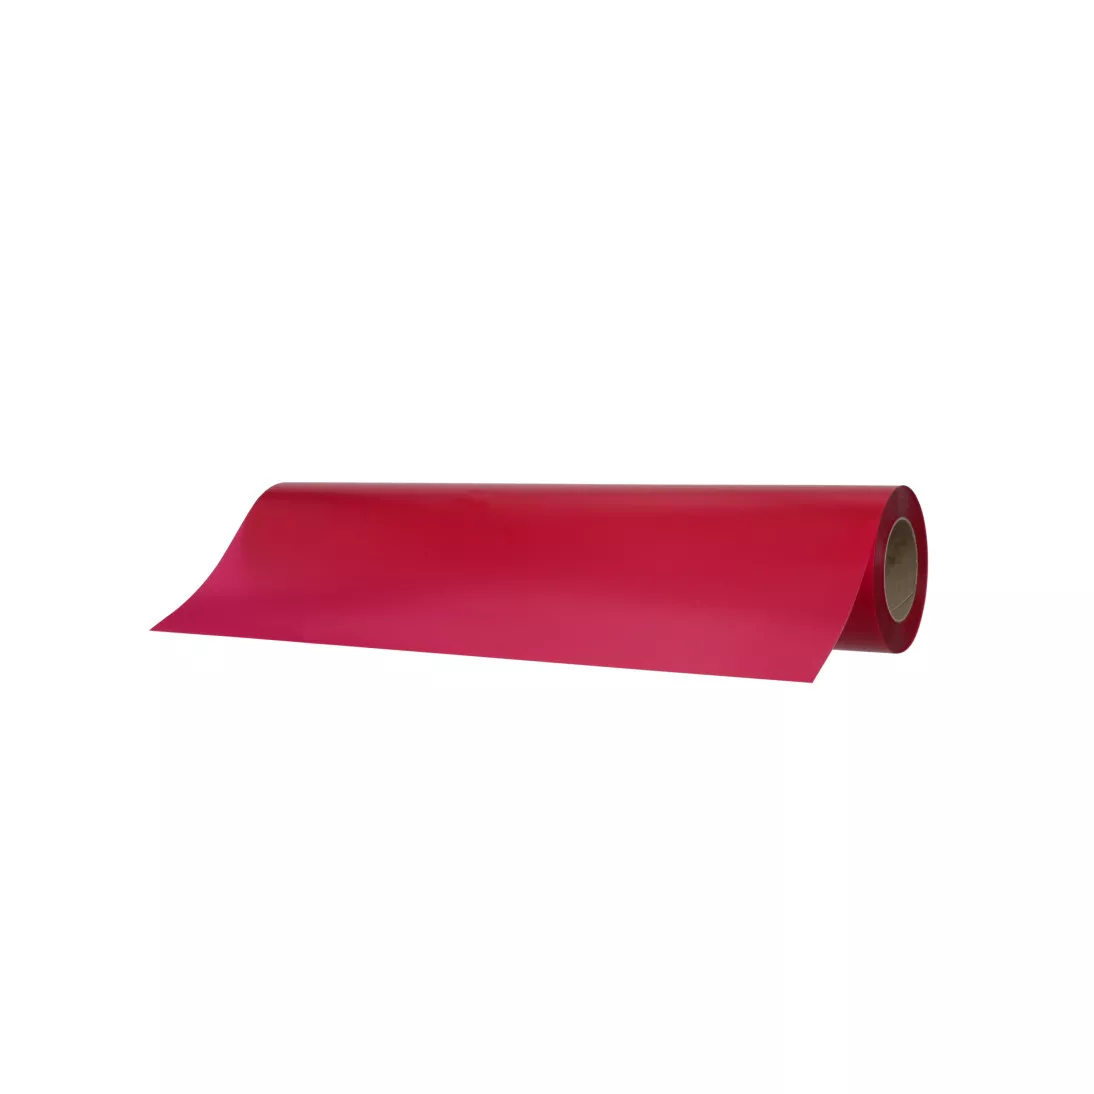 3M™ Scotchcal™ Translucent Graphic Film 3630-98, Electric Pink, 48 in x
50 yd